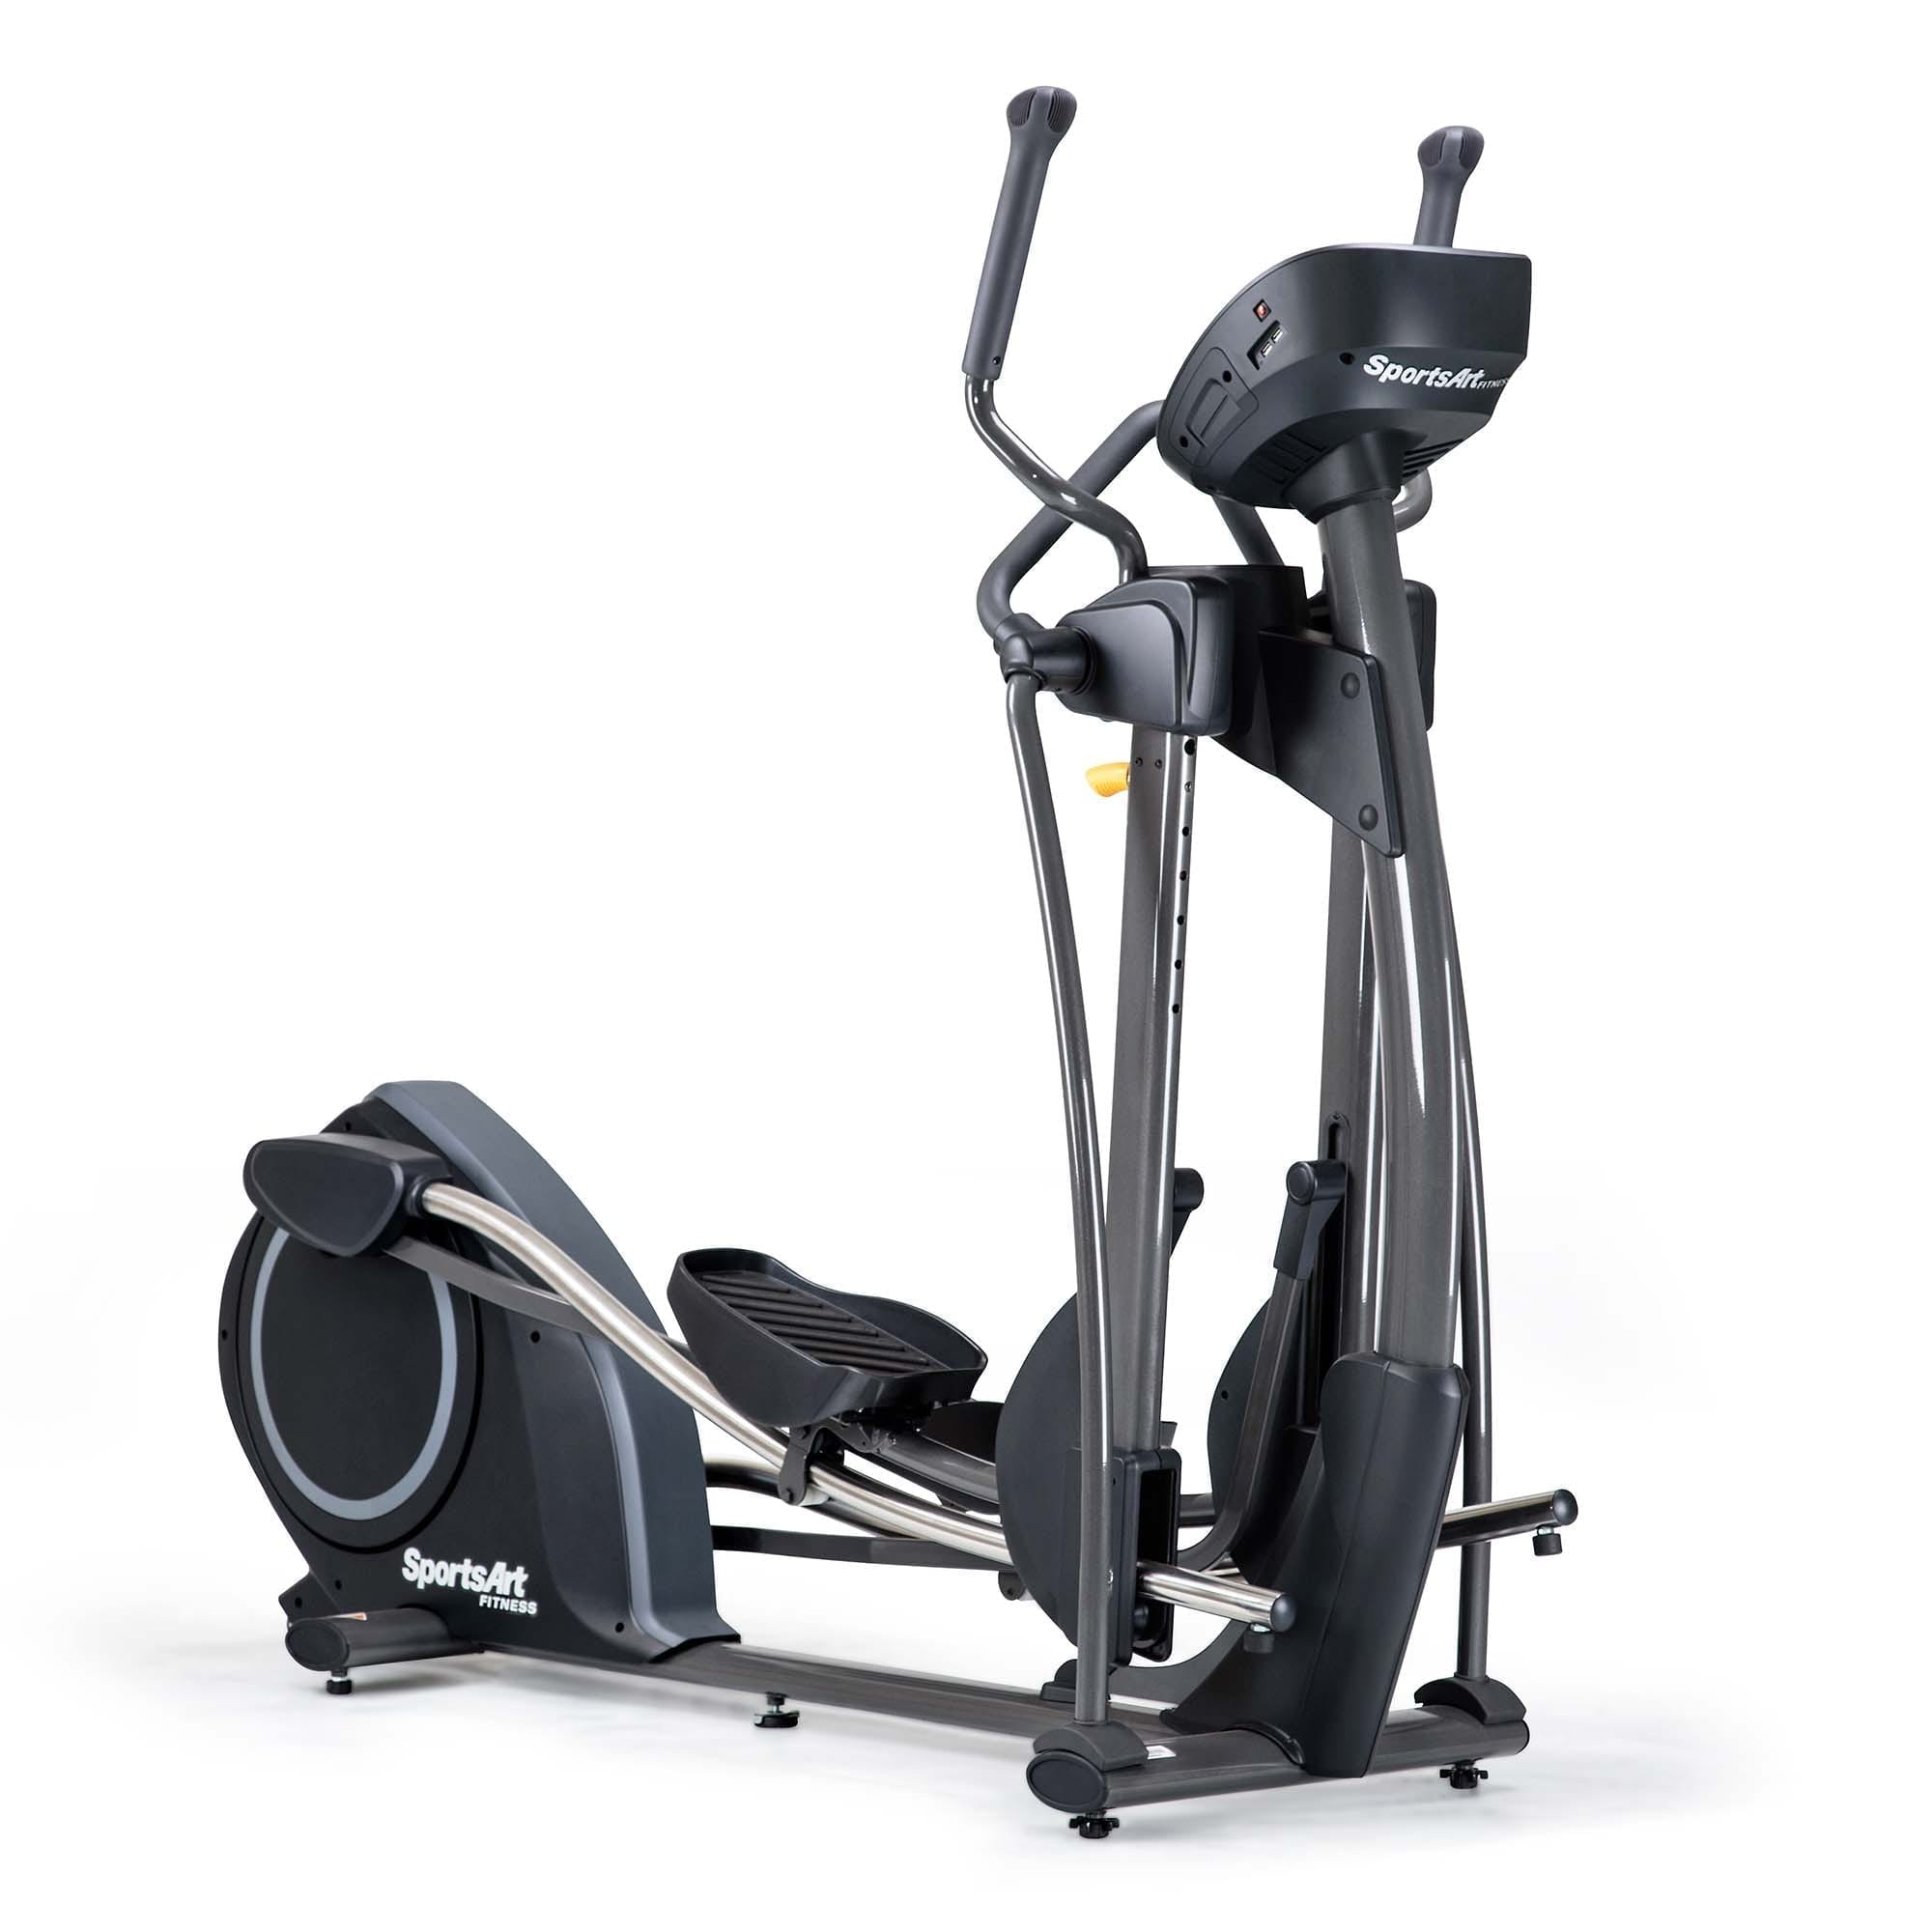 SportsArts Foundation Self Generating Elliptical E835 front facing side angle view